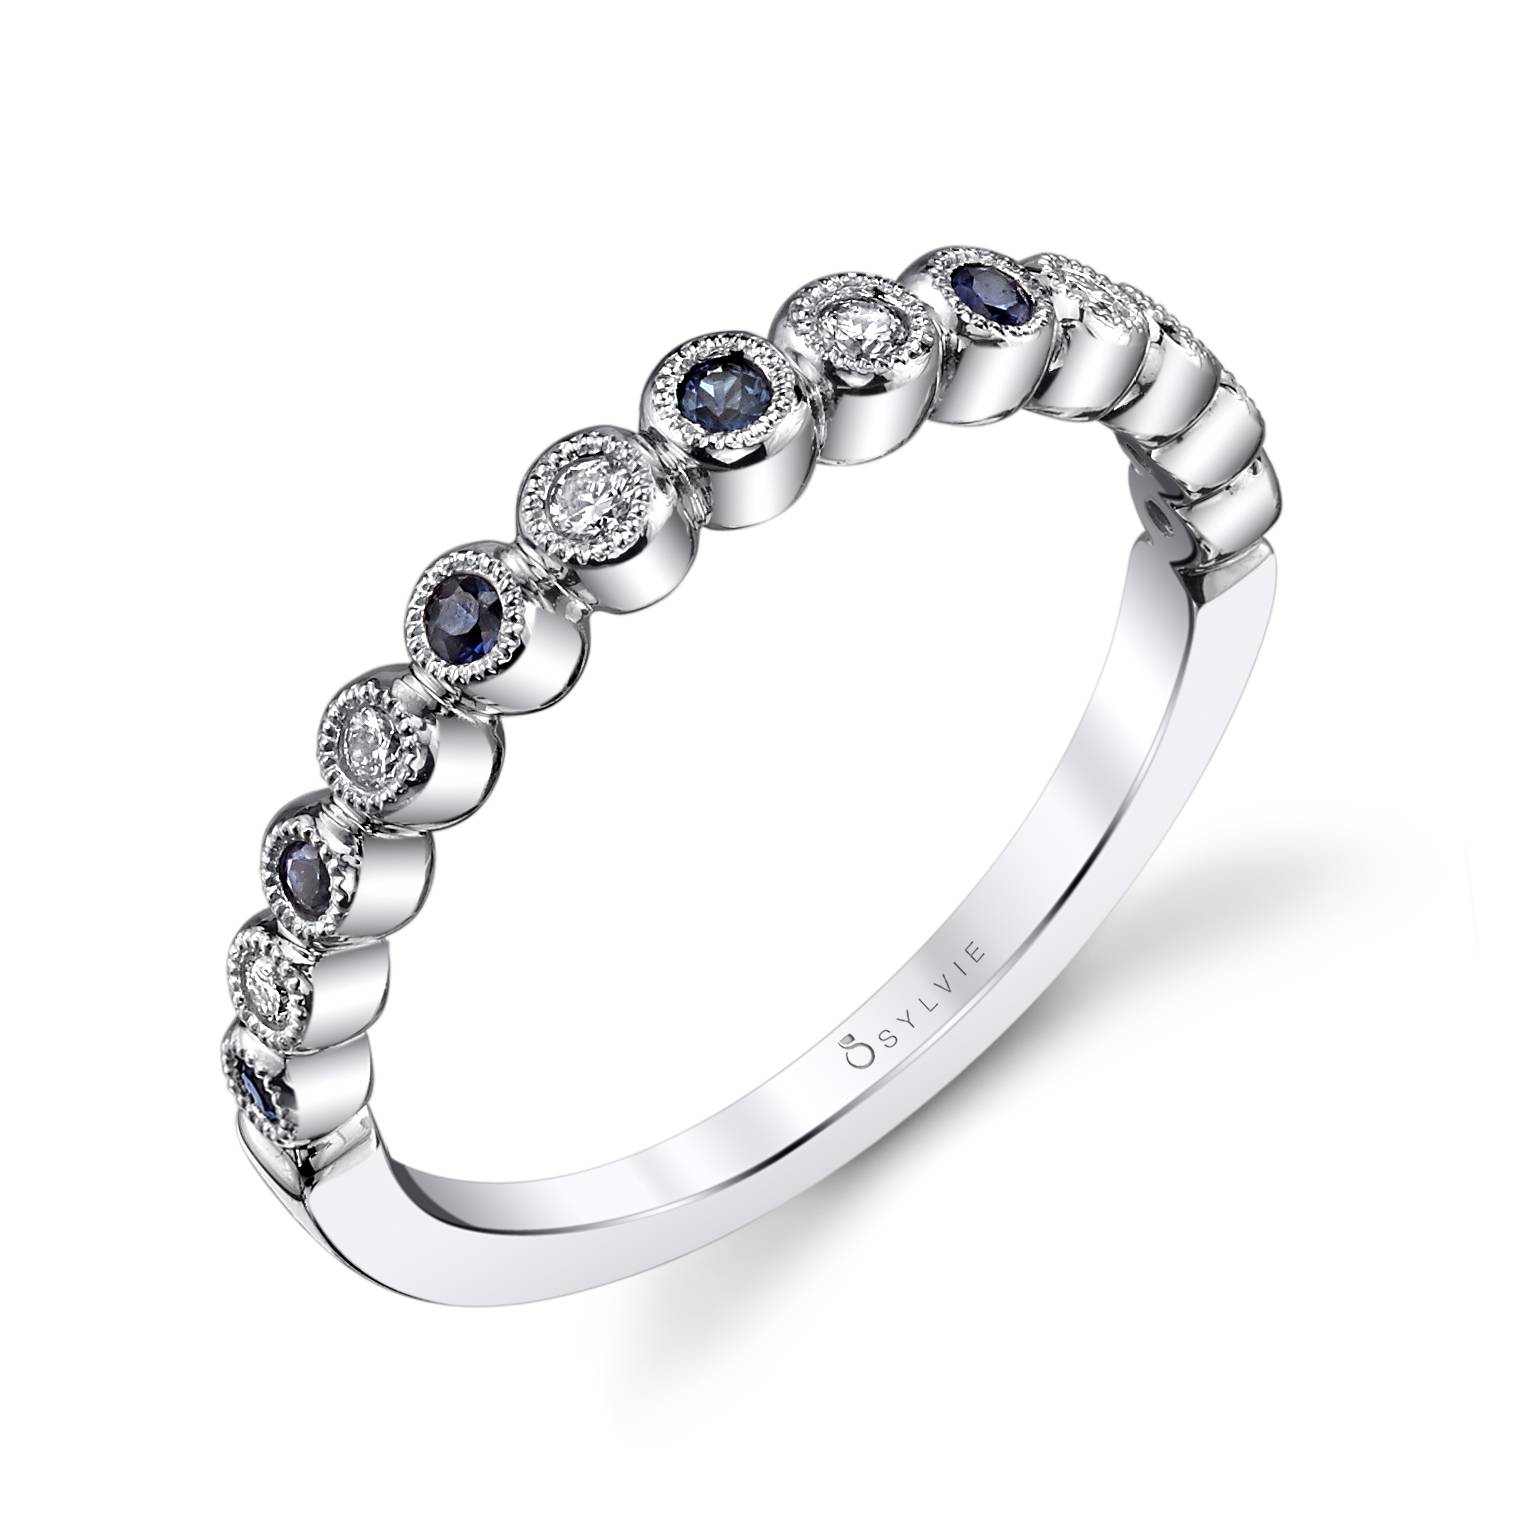 Béatrice – Round White Gold & Blue Sapphire Stackable Wedding Band